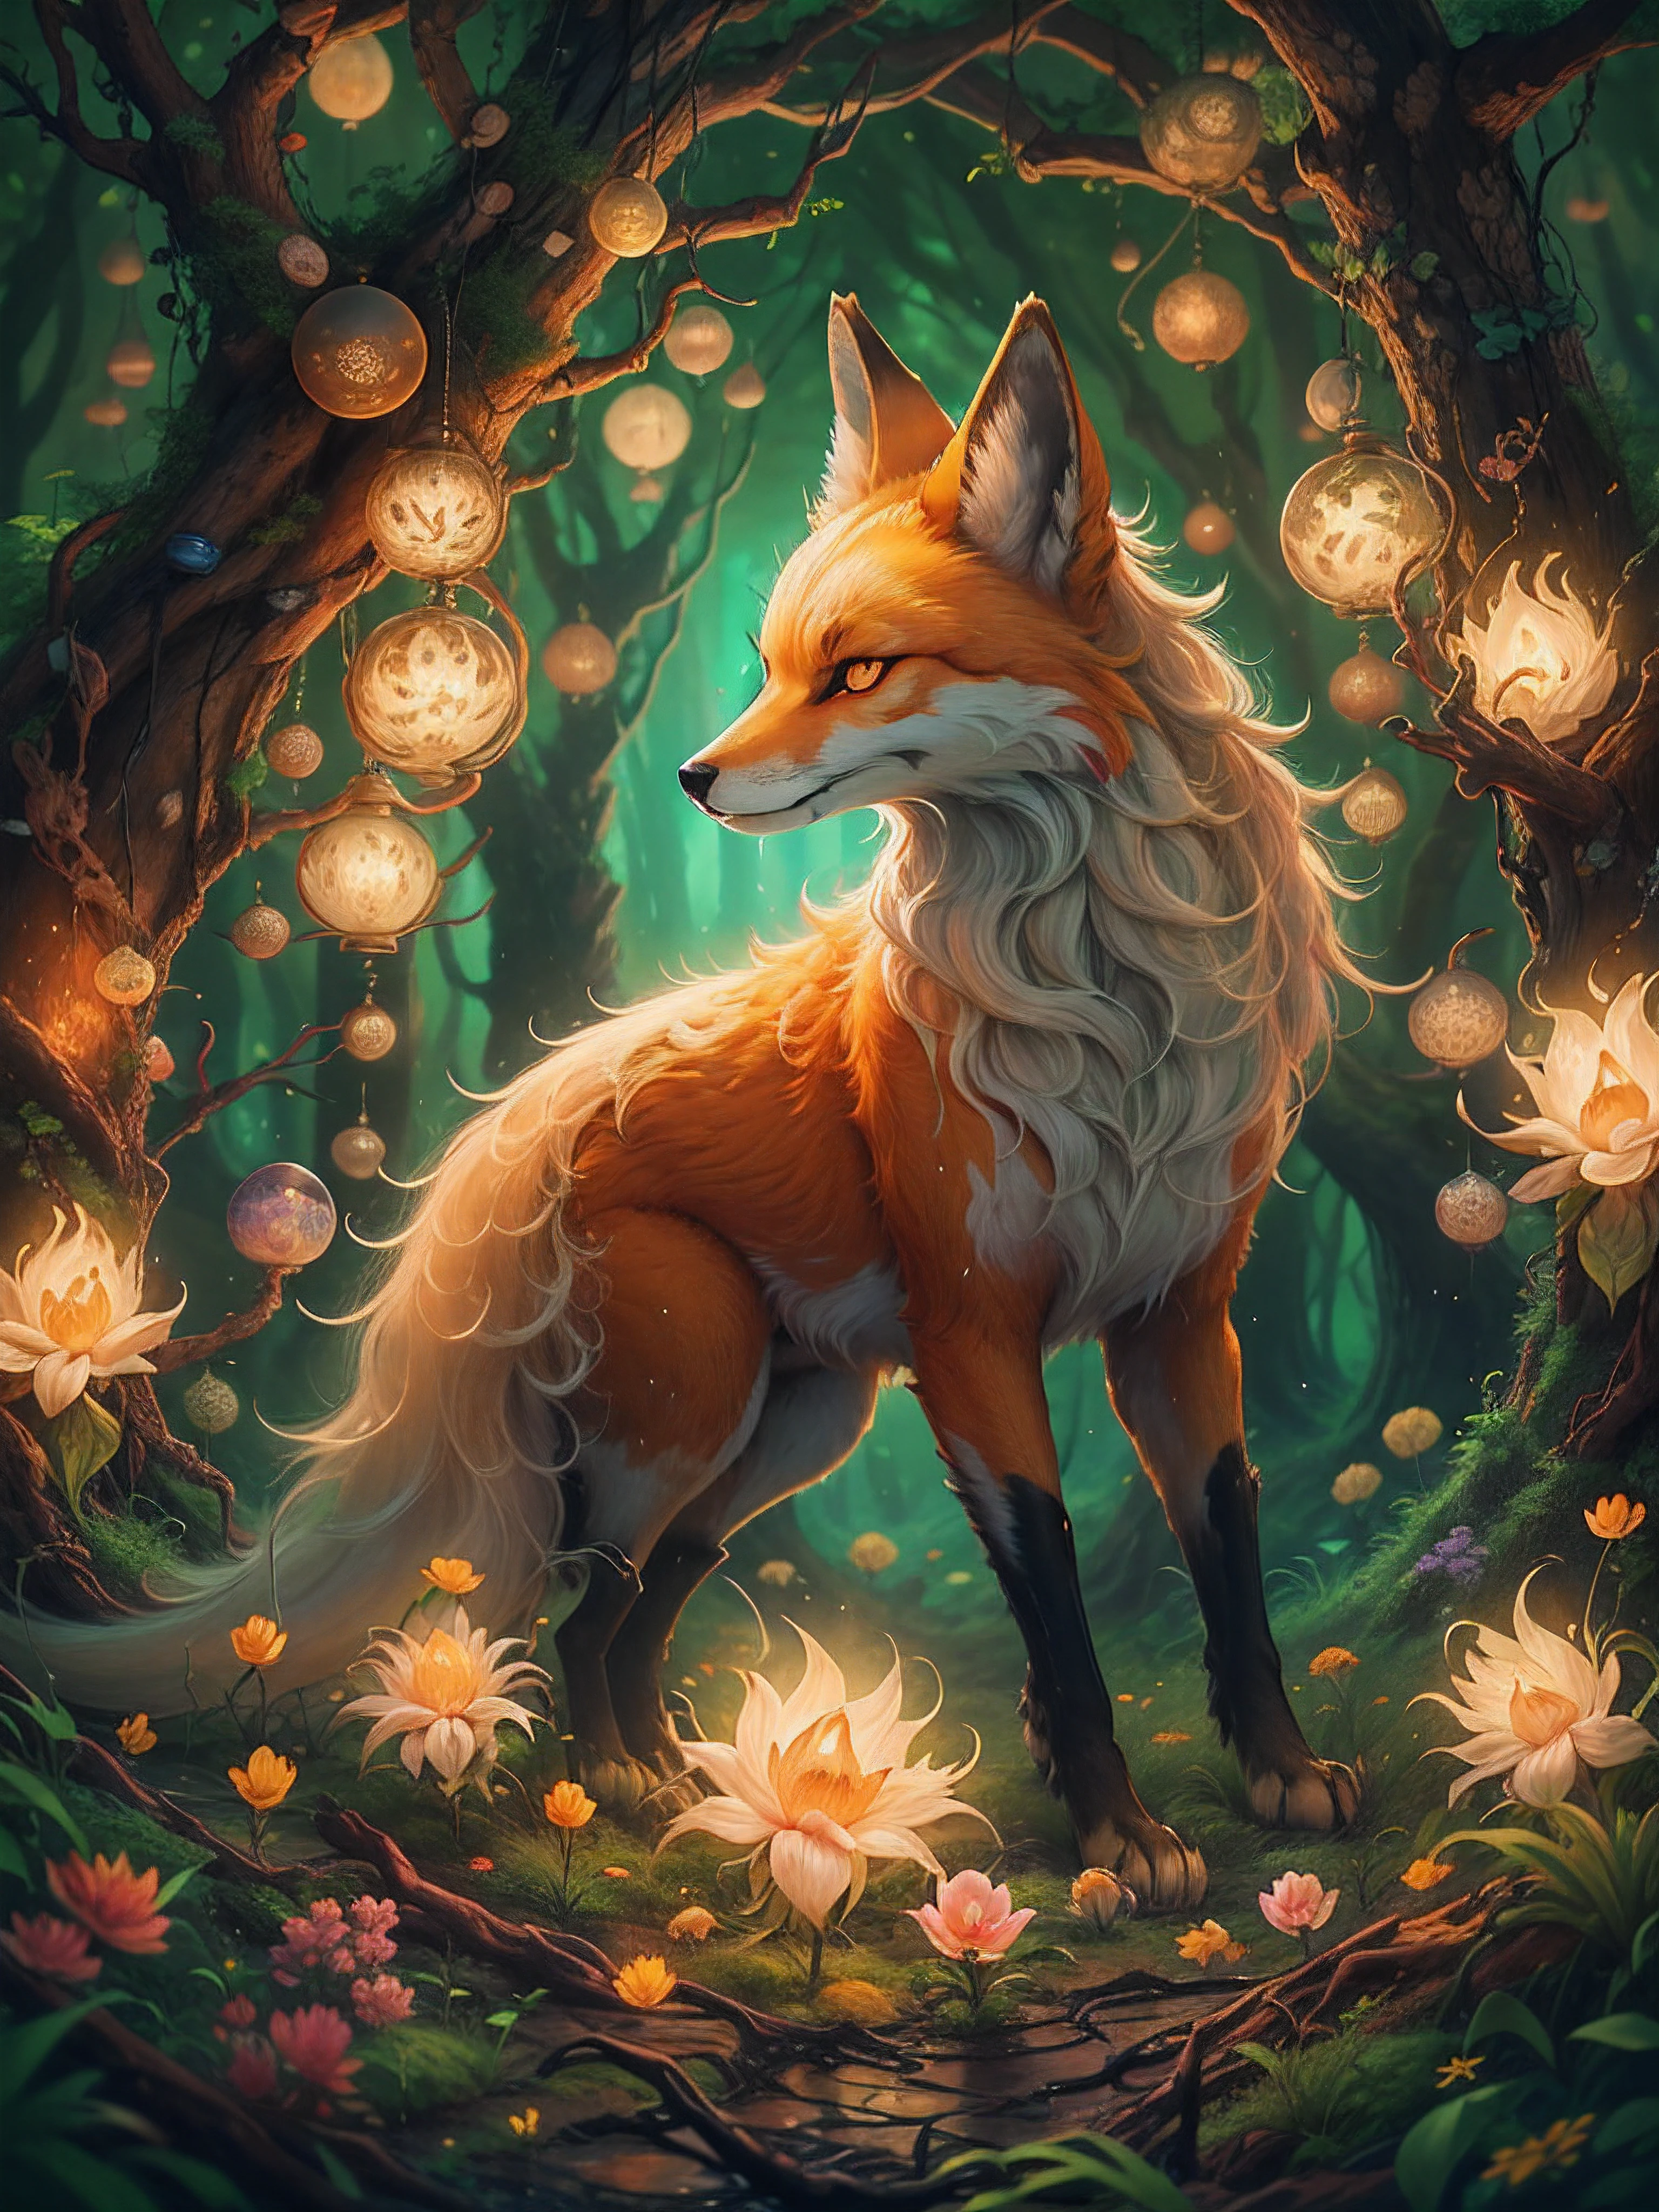 A beautiful digital painting of a nine tailed fox in a mystical forest. The fox is surrounded by glowing orbs of light and the forest is filled with lush green trees and flowers. The painting has a warm and inviting feeling.